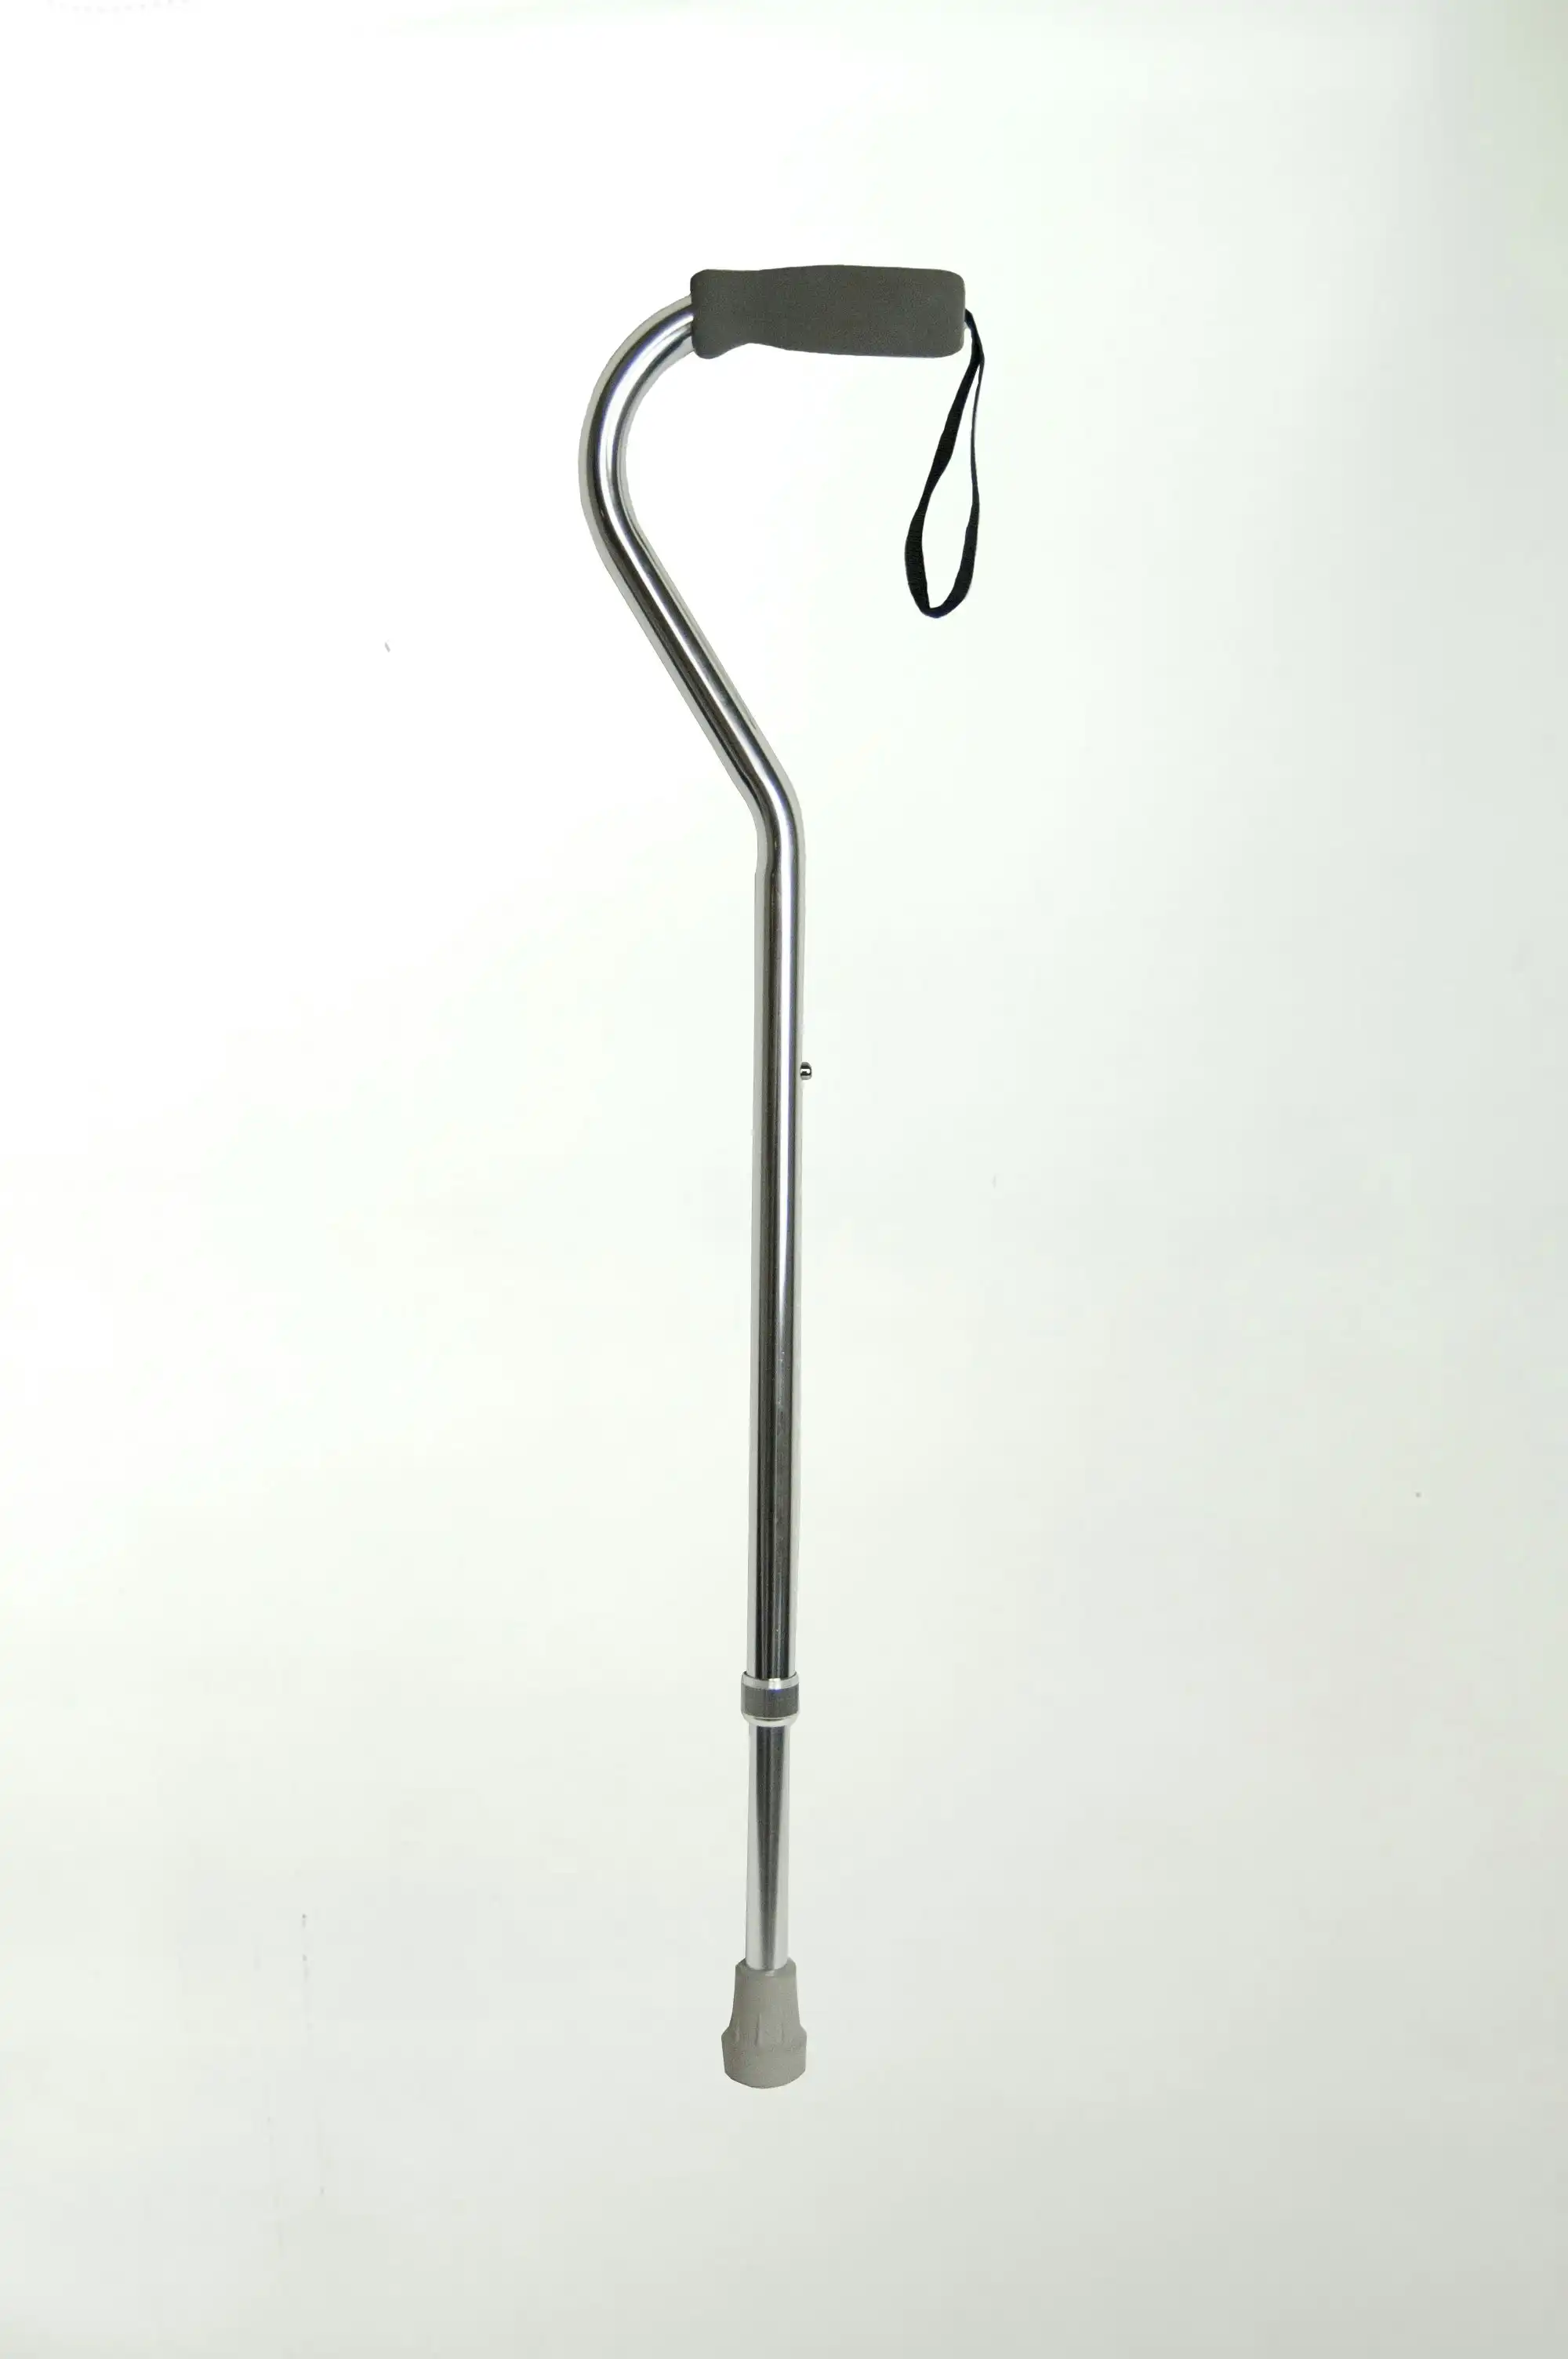 Livingstone Walking Stick, Swan Neck, Aluminium, Silver, Adjustable 78-100 cm, Withstand up to 100 kg, Each x3